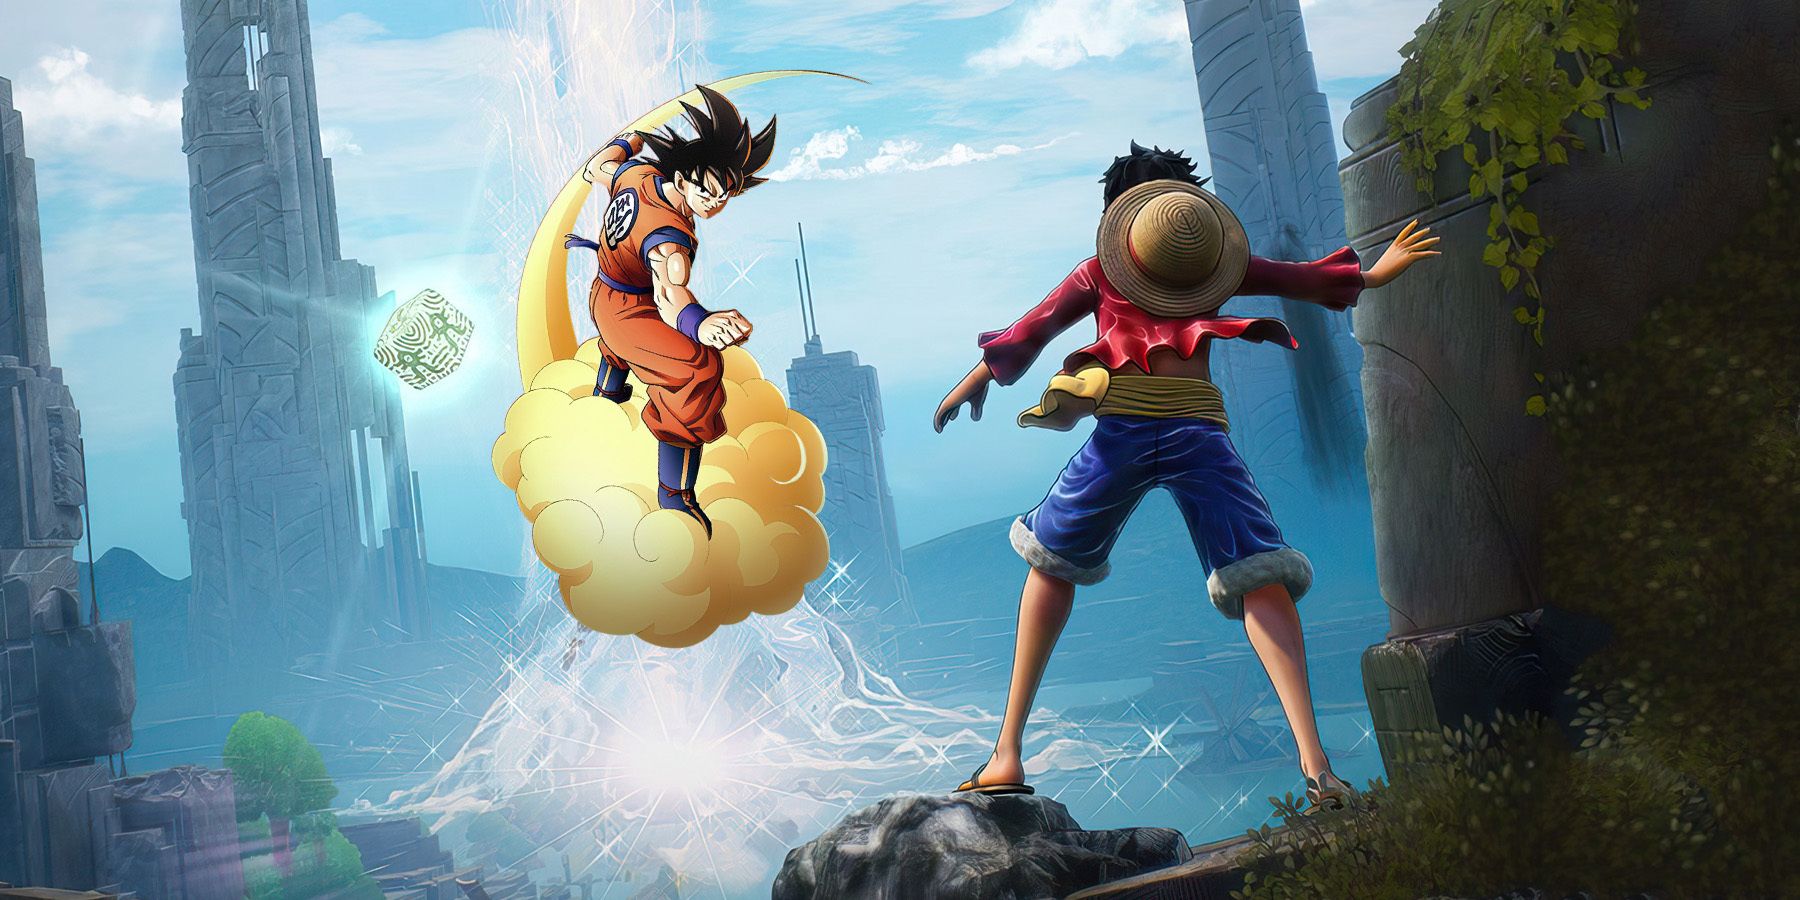 One Piece and Dragon Ball Z once saw an amazing fighting game